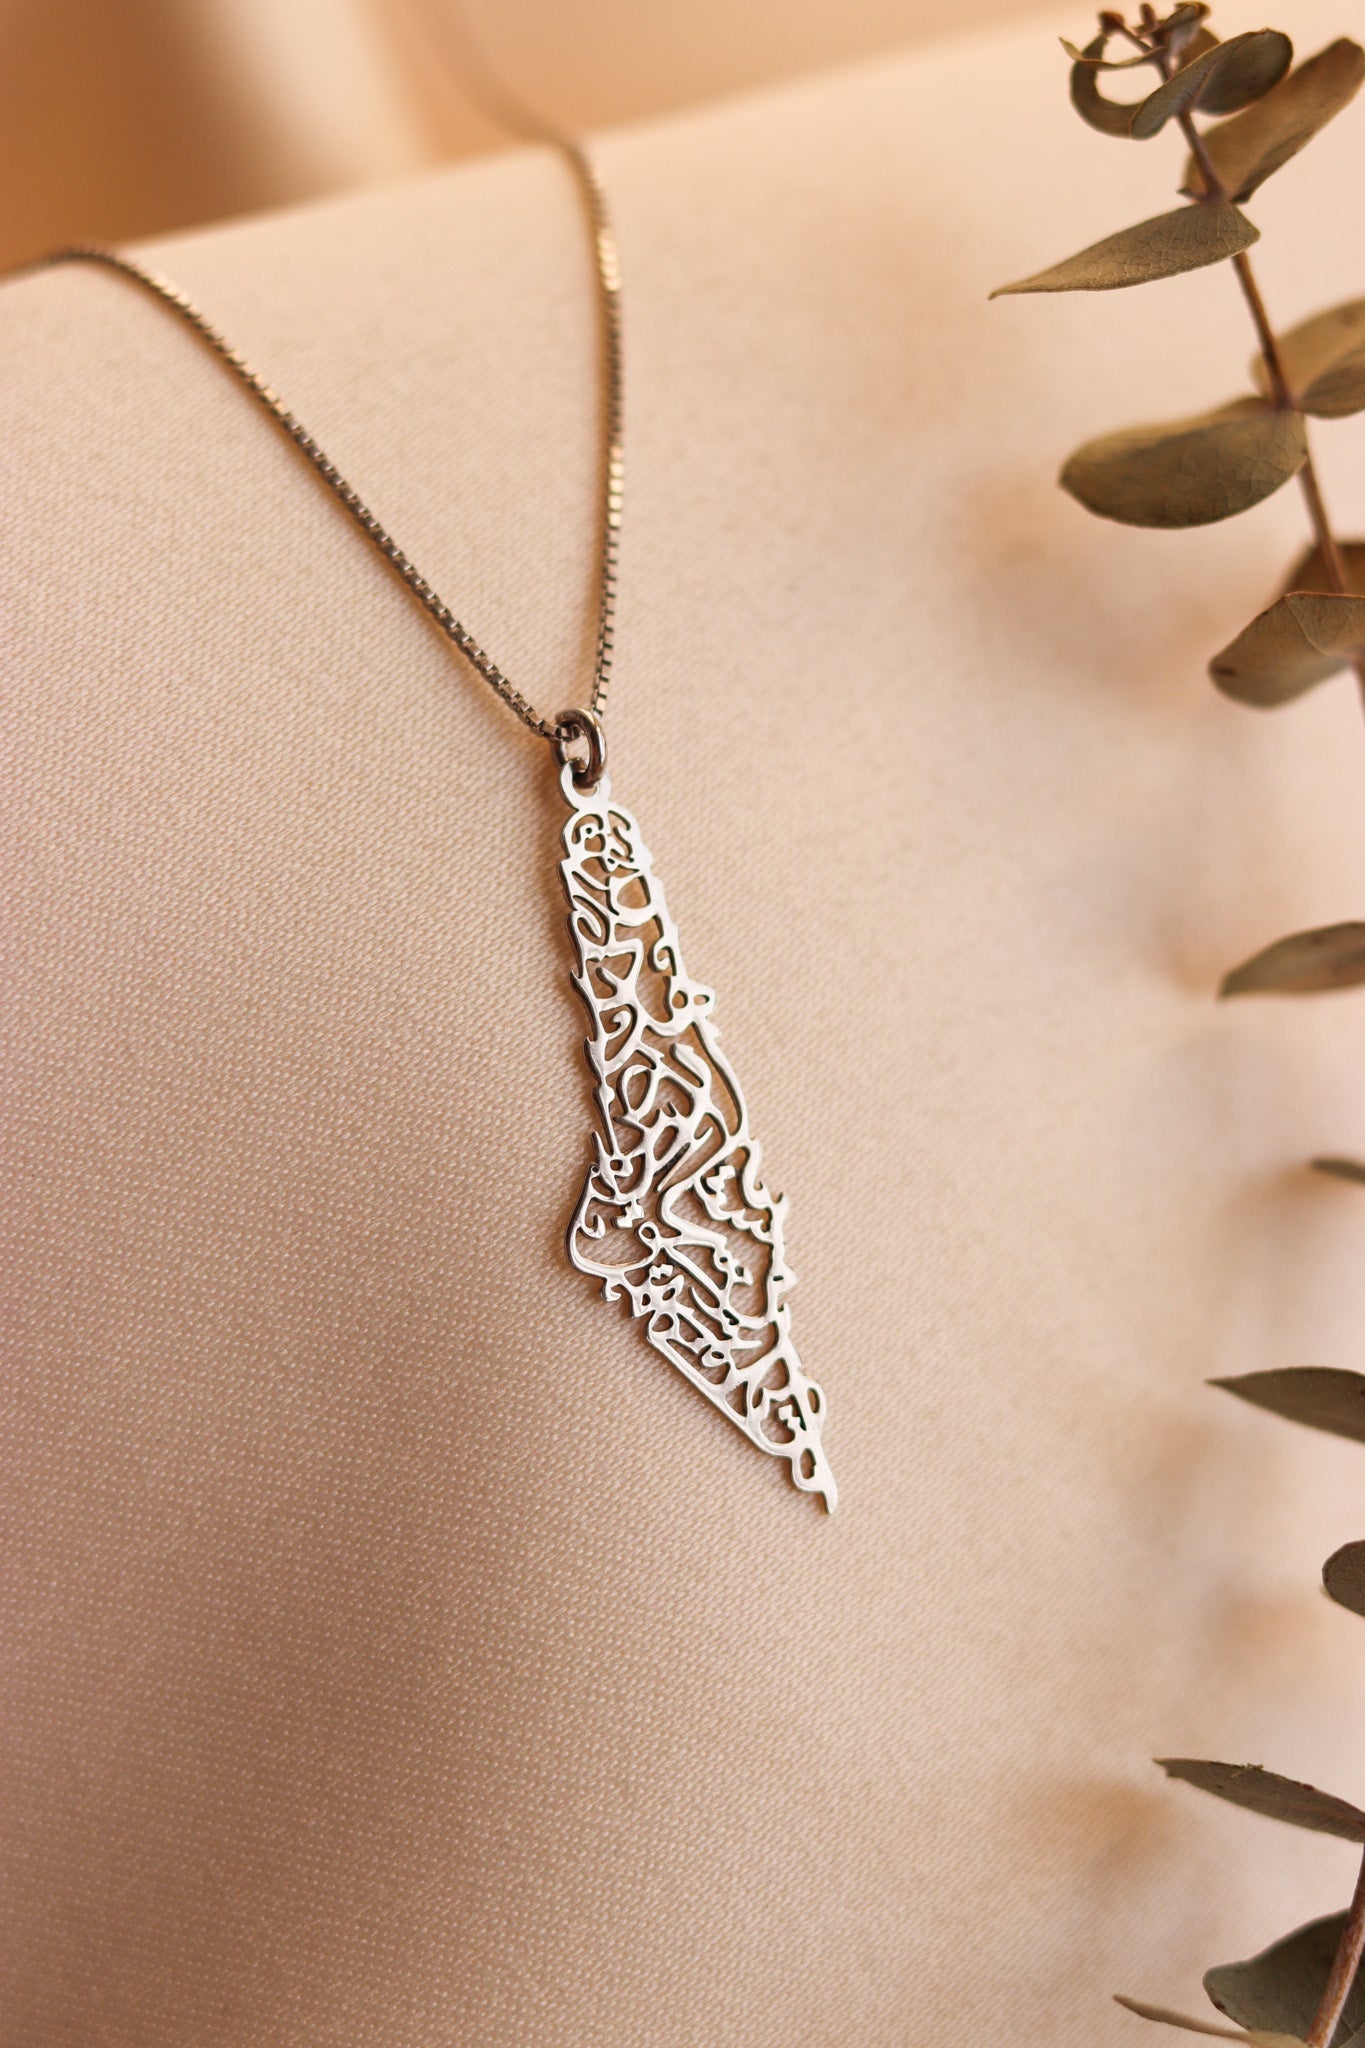 Palestine map with Palestinian famous poem written inside necklace